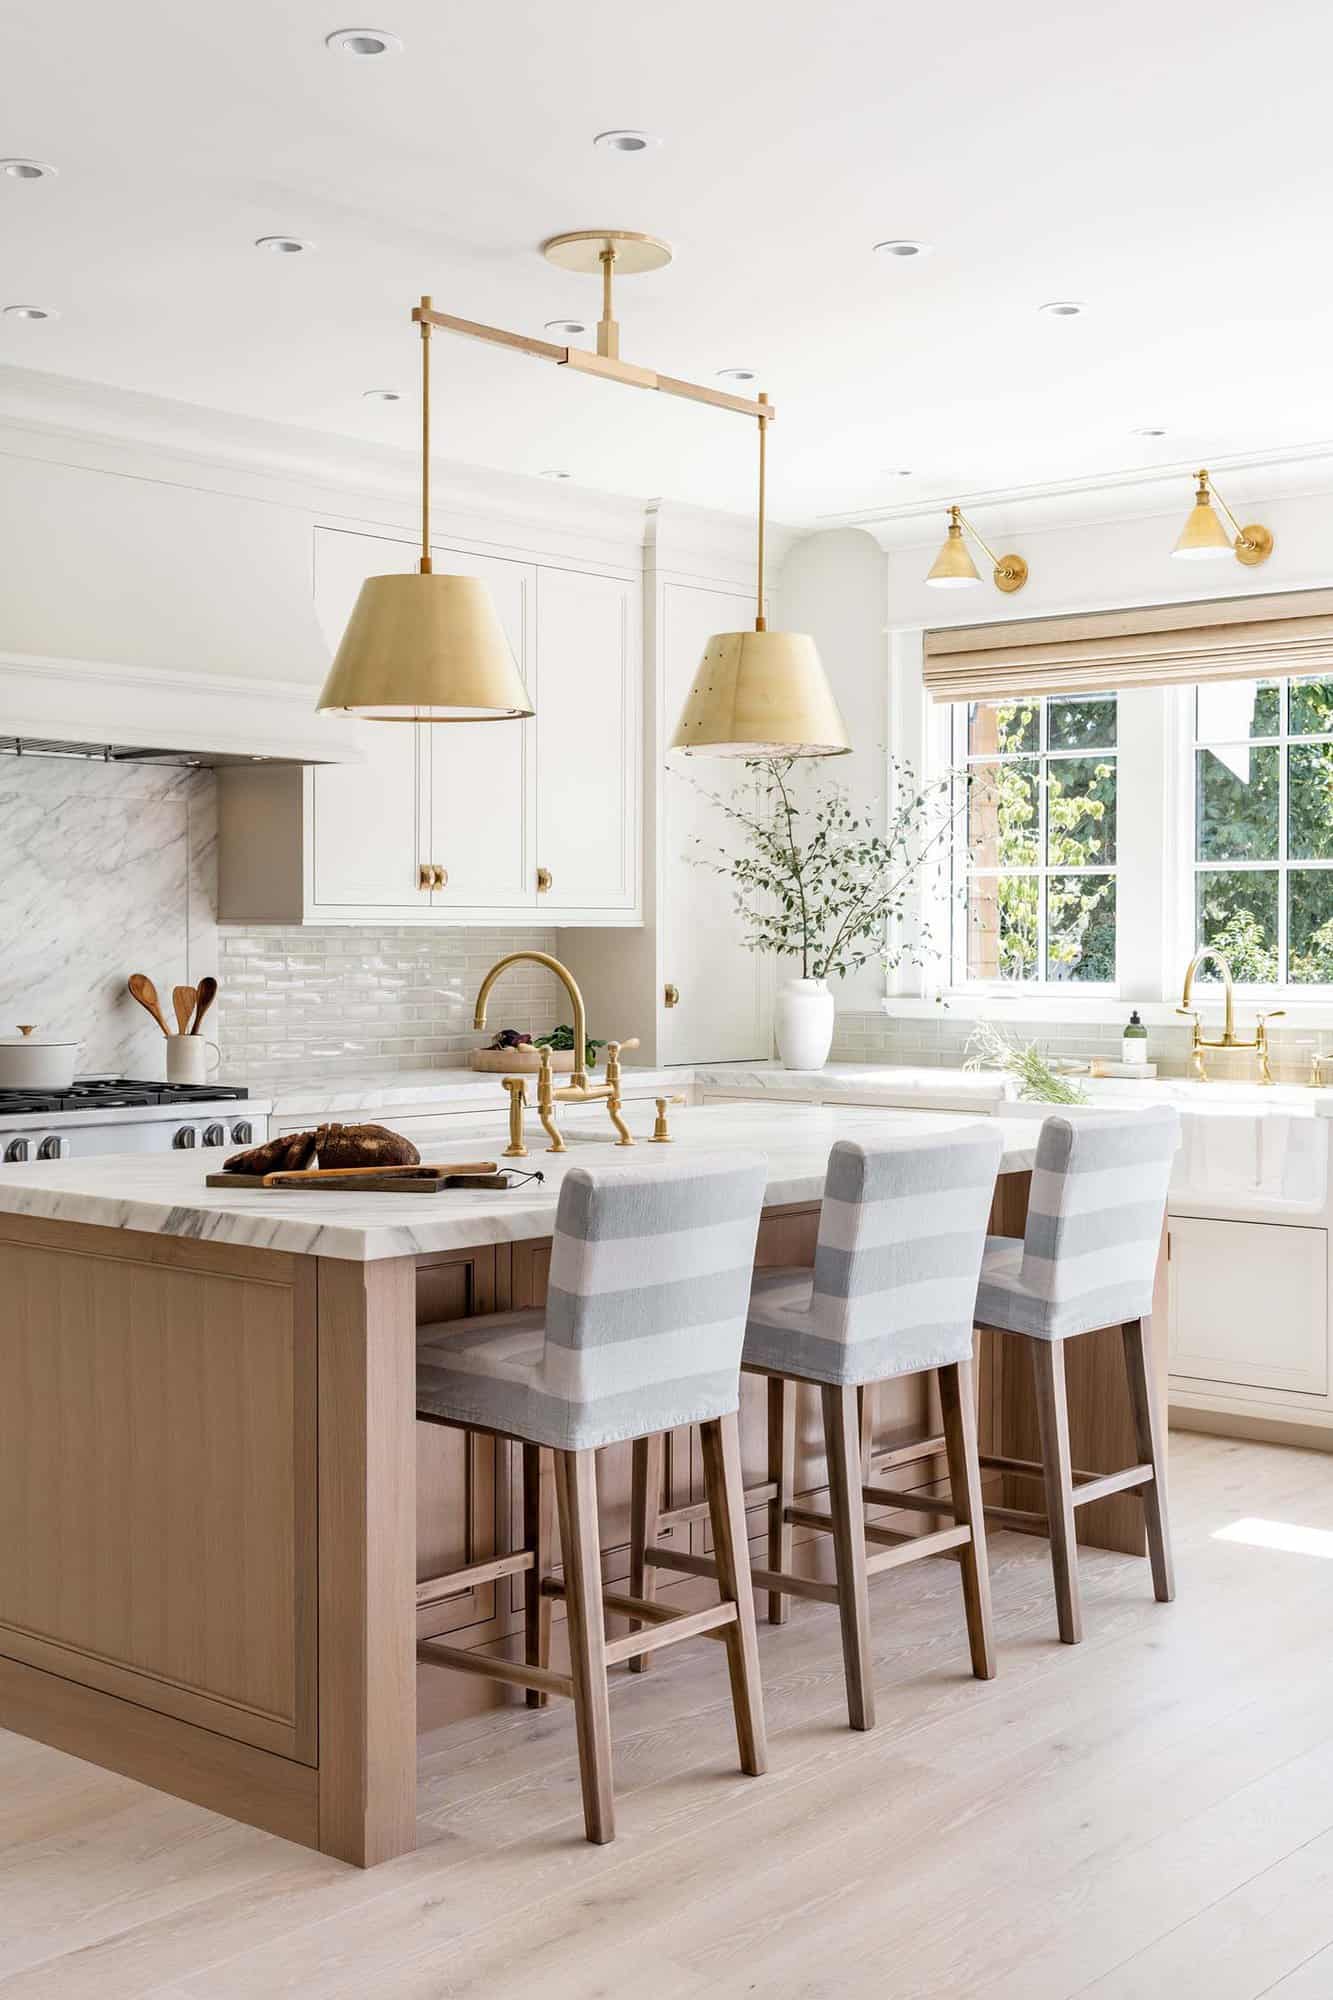 A neutral kitchen design with pops of grey and gold.